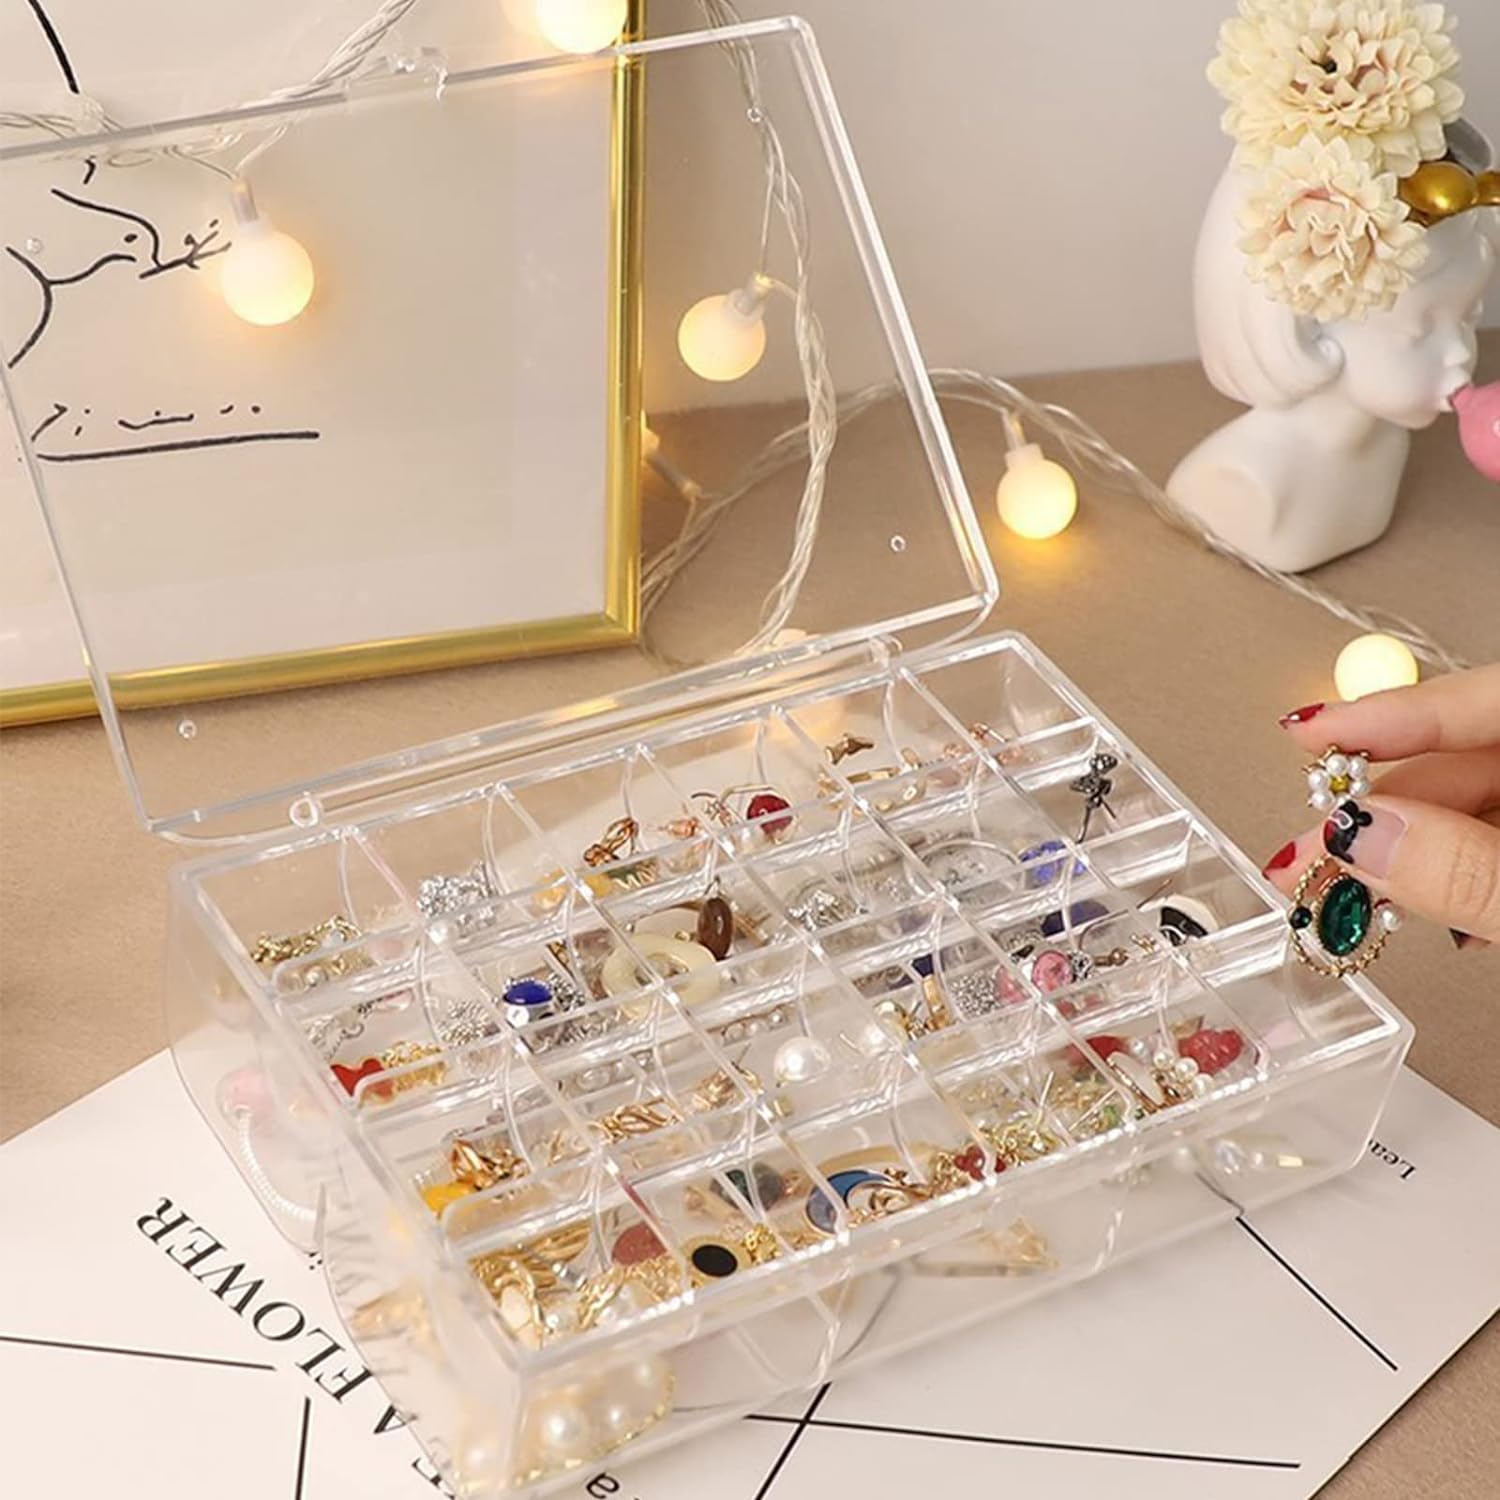 12829 2 layer Acrylic Jewelry Storage Box Dustproof Earring Box, Storage Box Portable Nail Art Storage Case, 24-Grid Small and 6-Grid Big case Makeup Vanity Box (1 Pc / 30 Compartment)